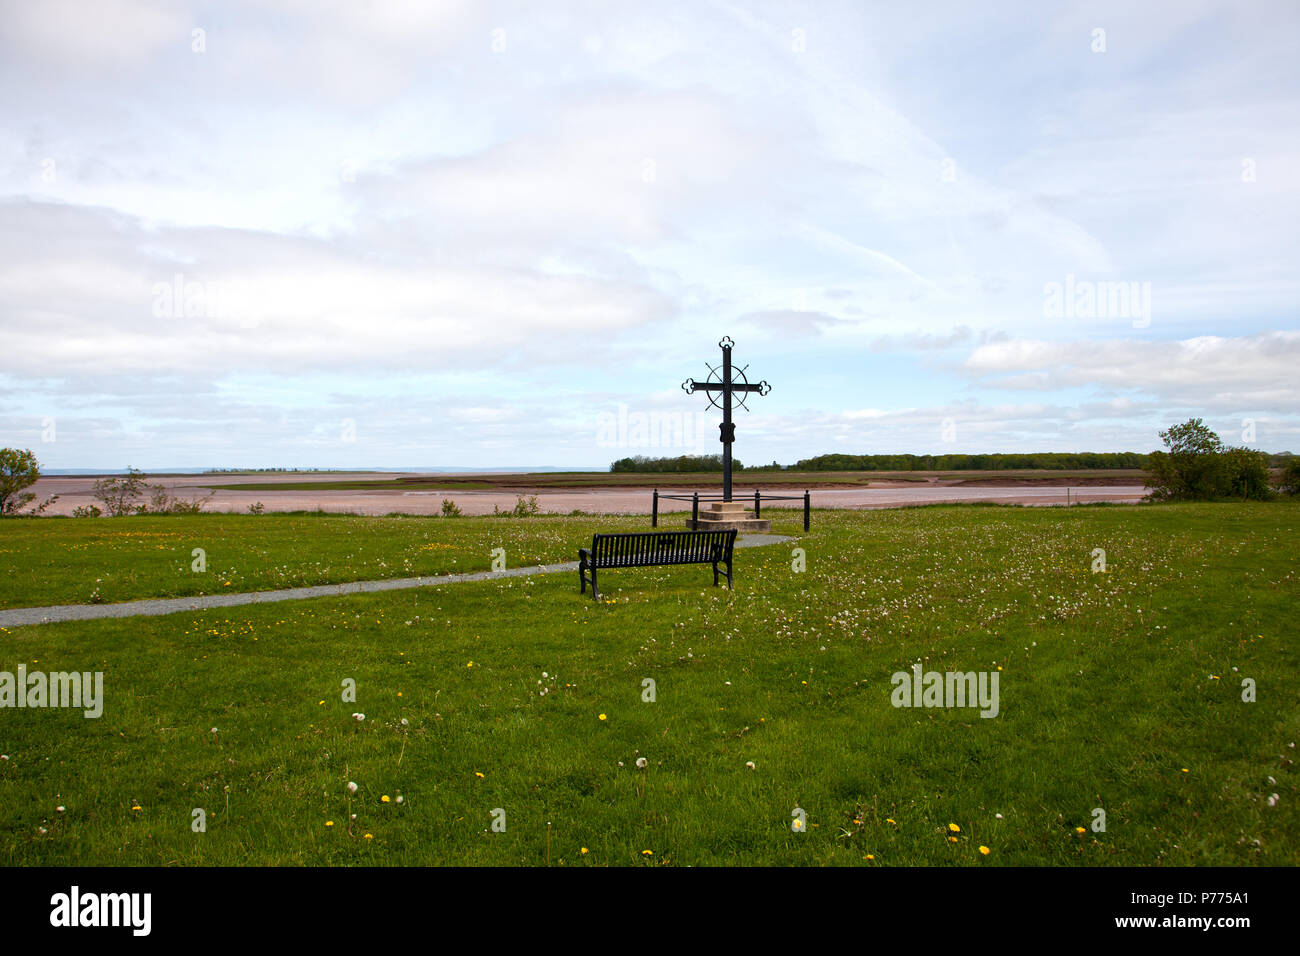 The Acadian Memorial Cross in Nova Scotia, this was the location where many Acadians were deported from the province in 1755. Stock Photo